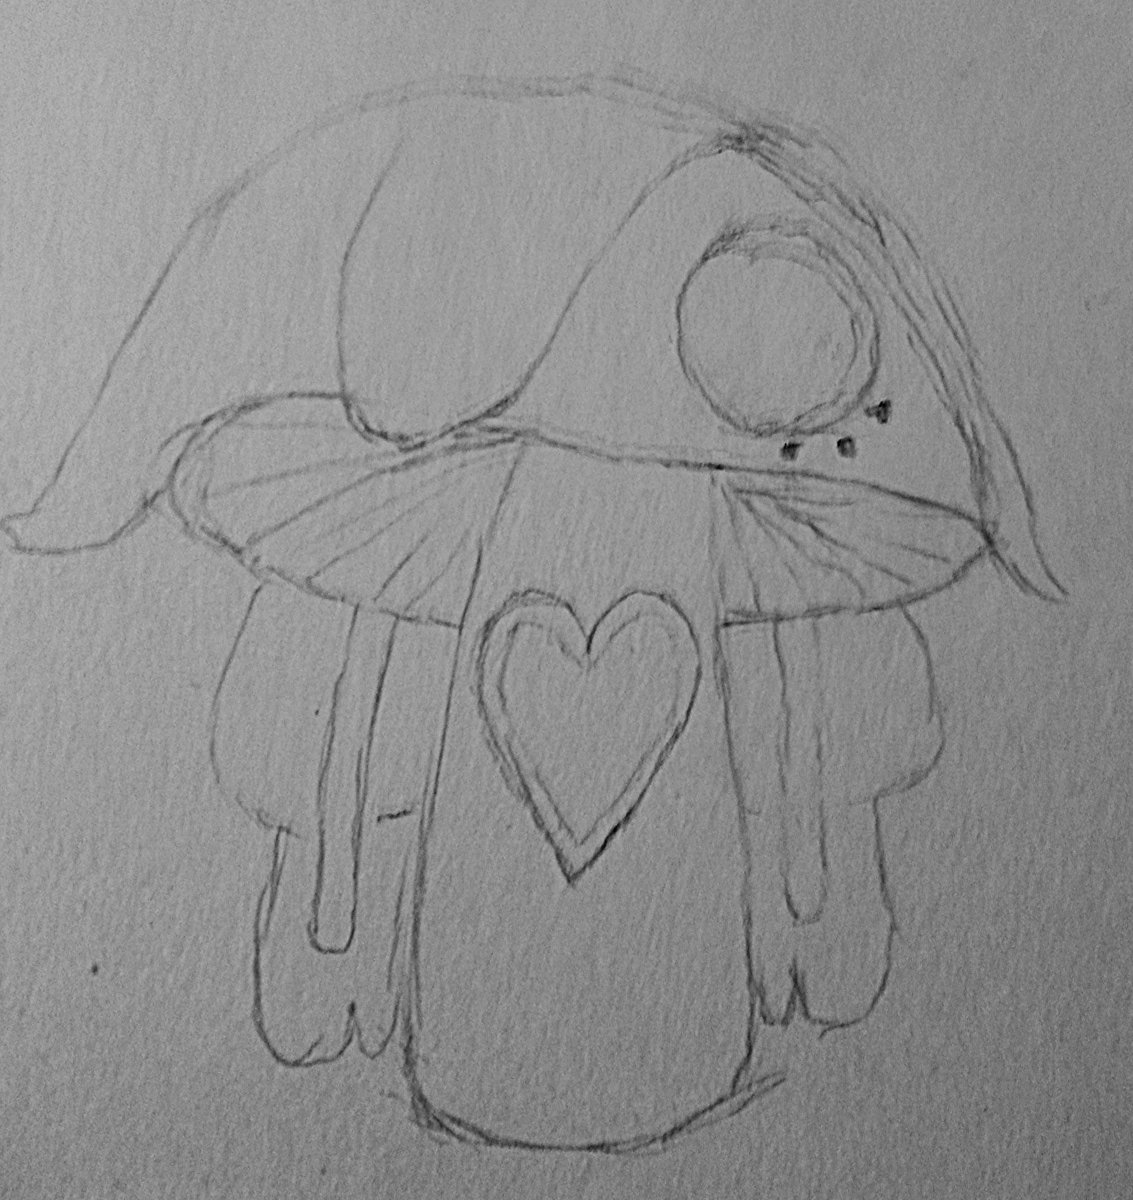 Would you guys still love Tarr if she was a mushroom?